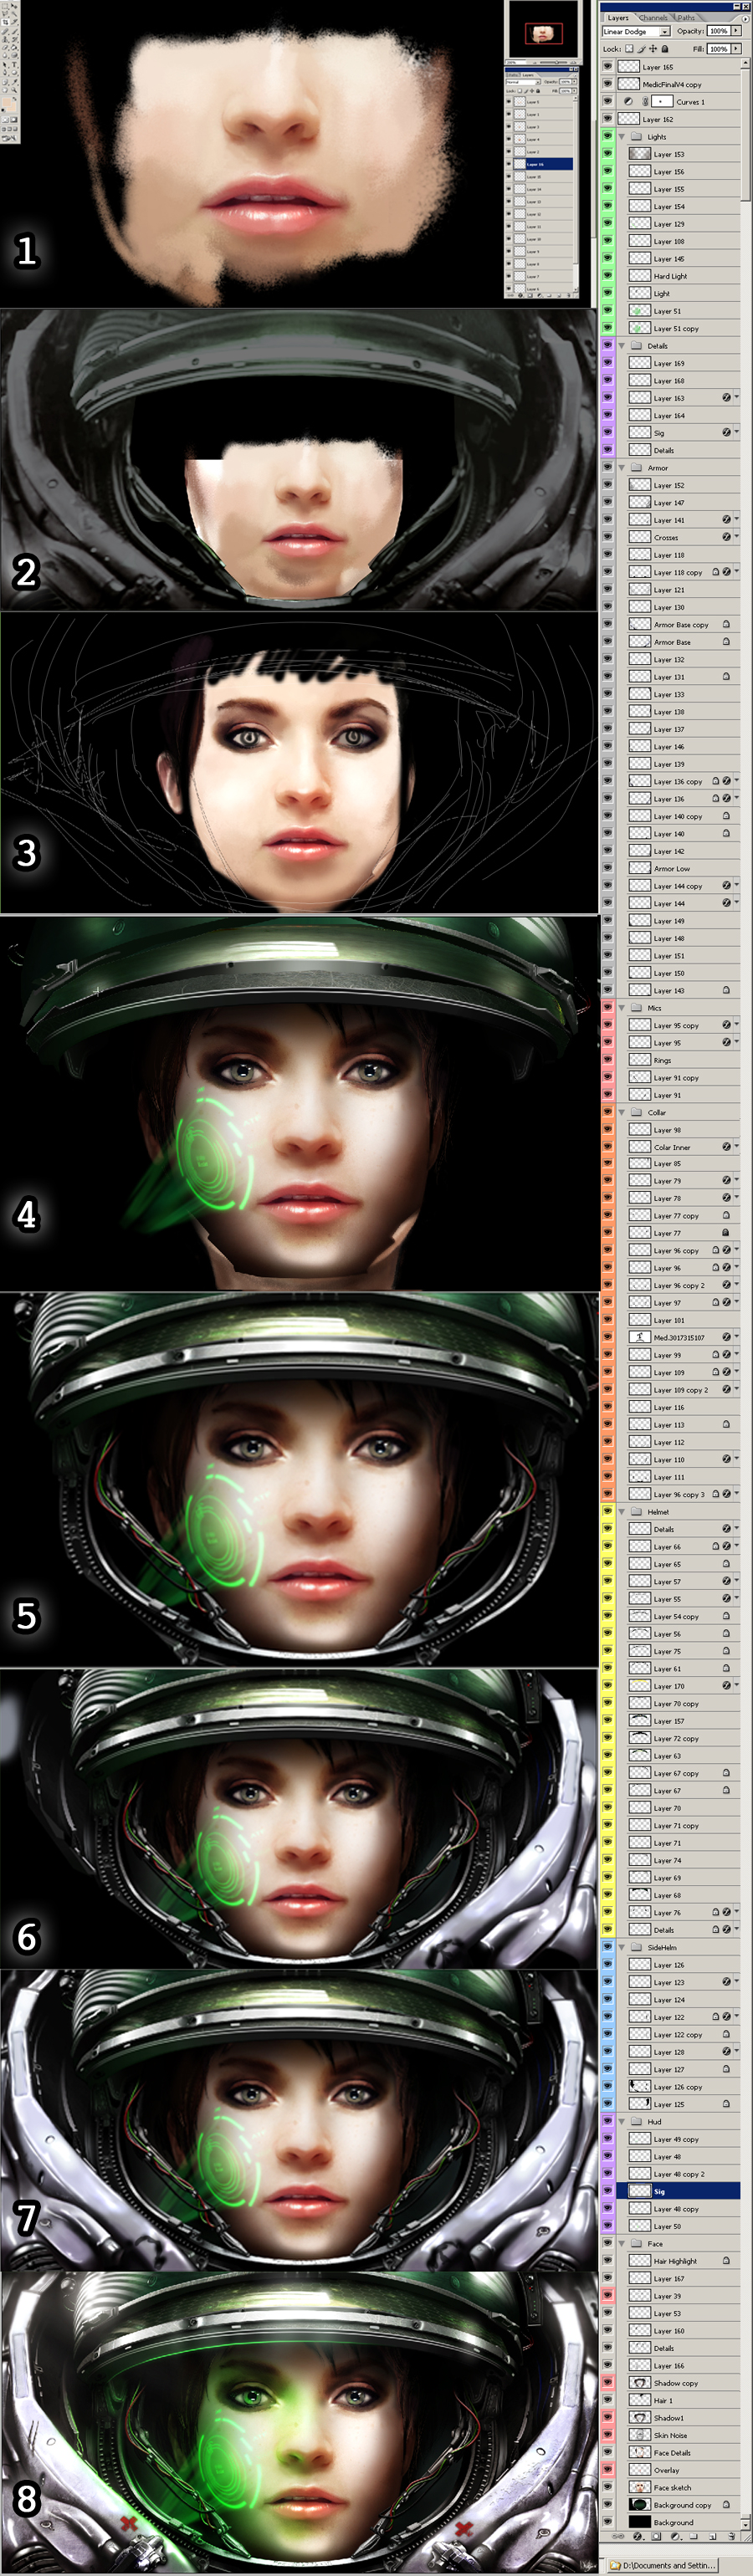 Terran_Medic___The_Making_Of_by_VonSchlippe